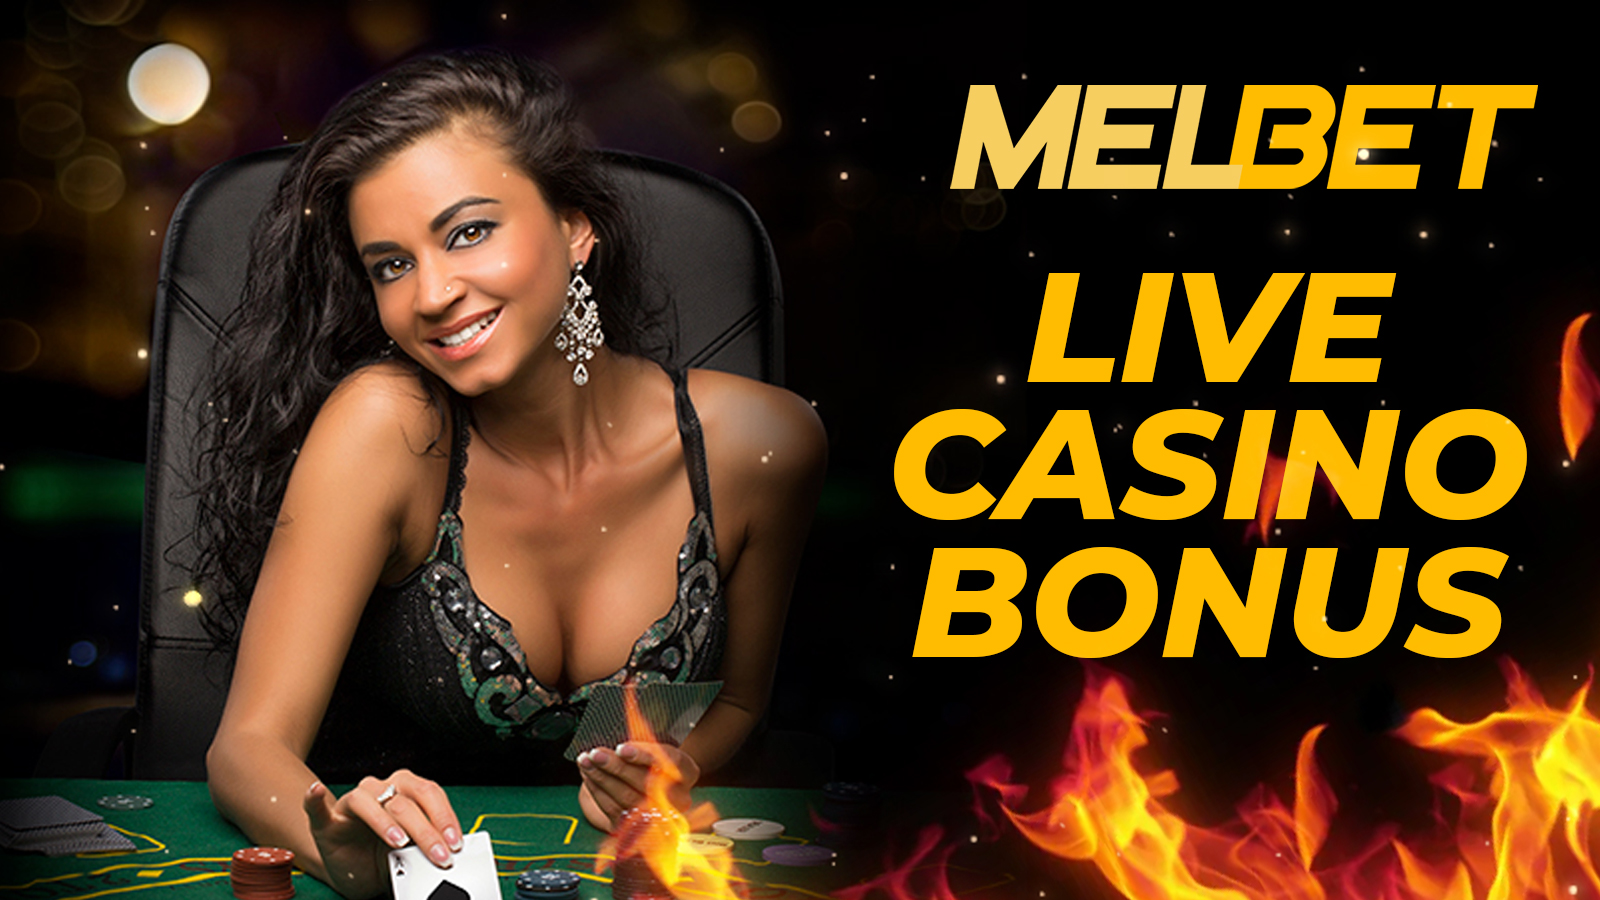 GEt a bonus and spend it on live casino games at Melbet.